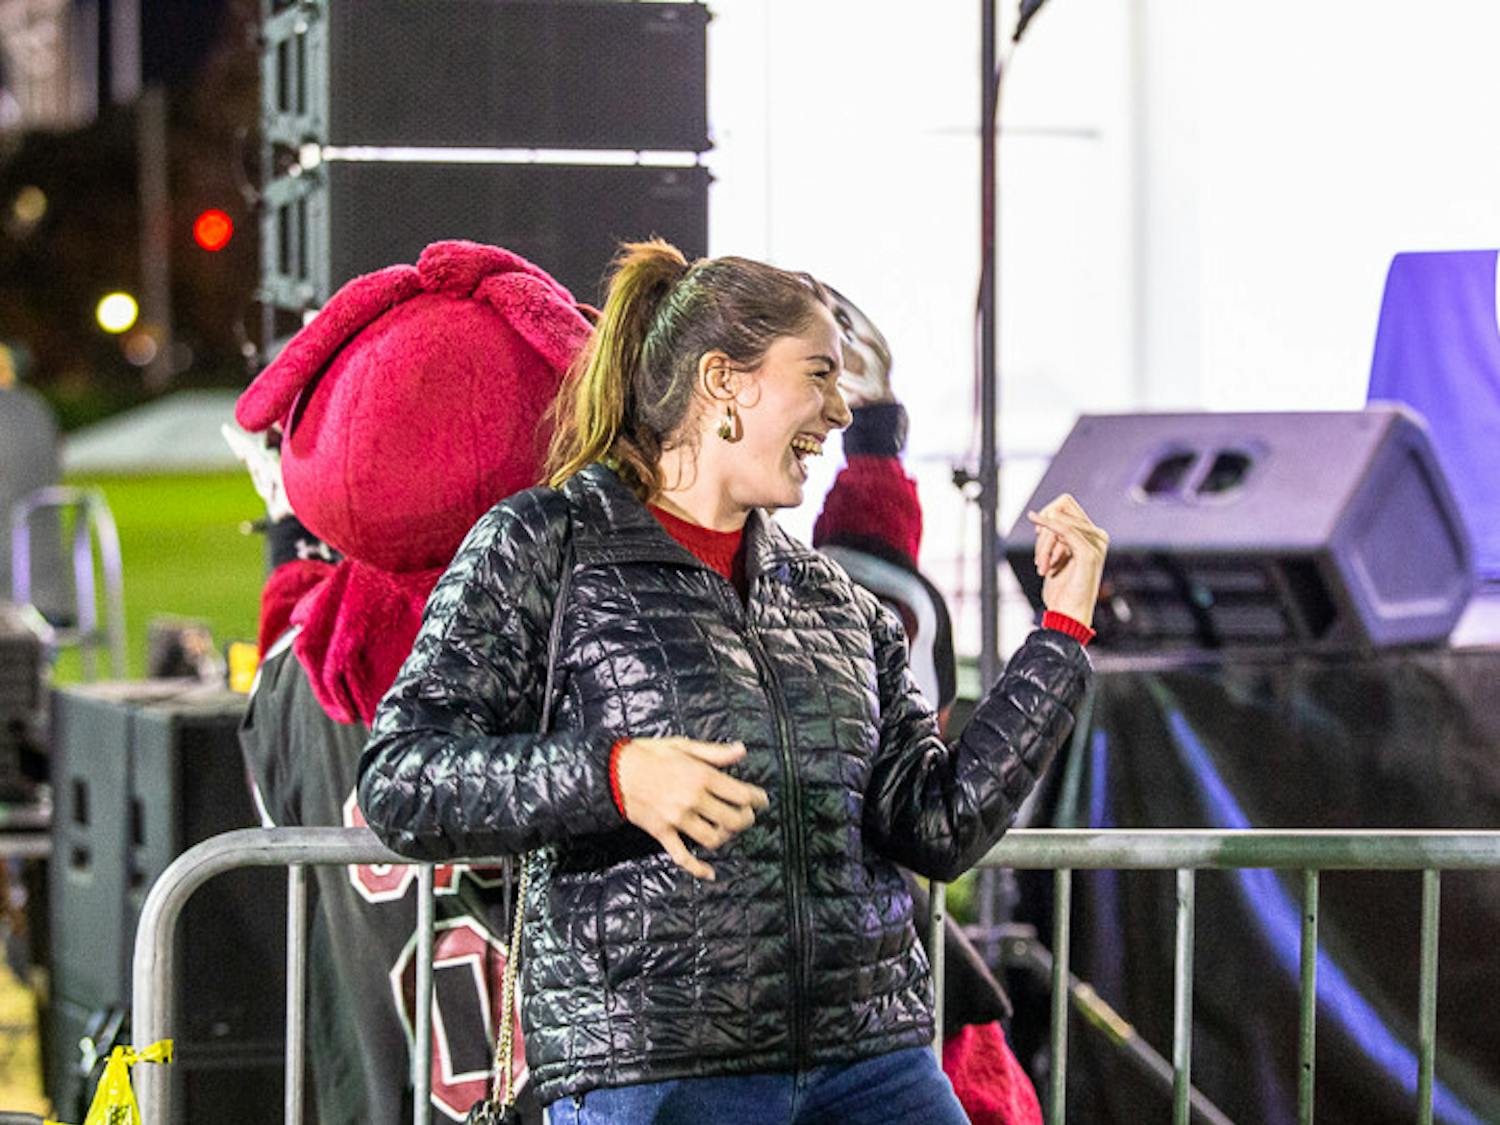 Third-year nursing major Rose Ferguson plays the air-guitar with Cockey during the playing of "Eye of the Tiger" after the USC Tiger Burning on Nov. 21, 2022. USC hosts this event annually during the week leading up to the South Carolina-Clemson football rival match the following Saturday. This year Clemson is hosting the game at their field, "Death Valley."